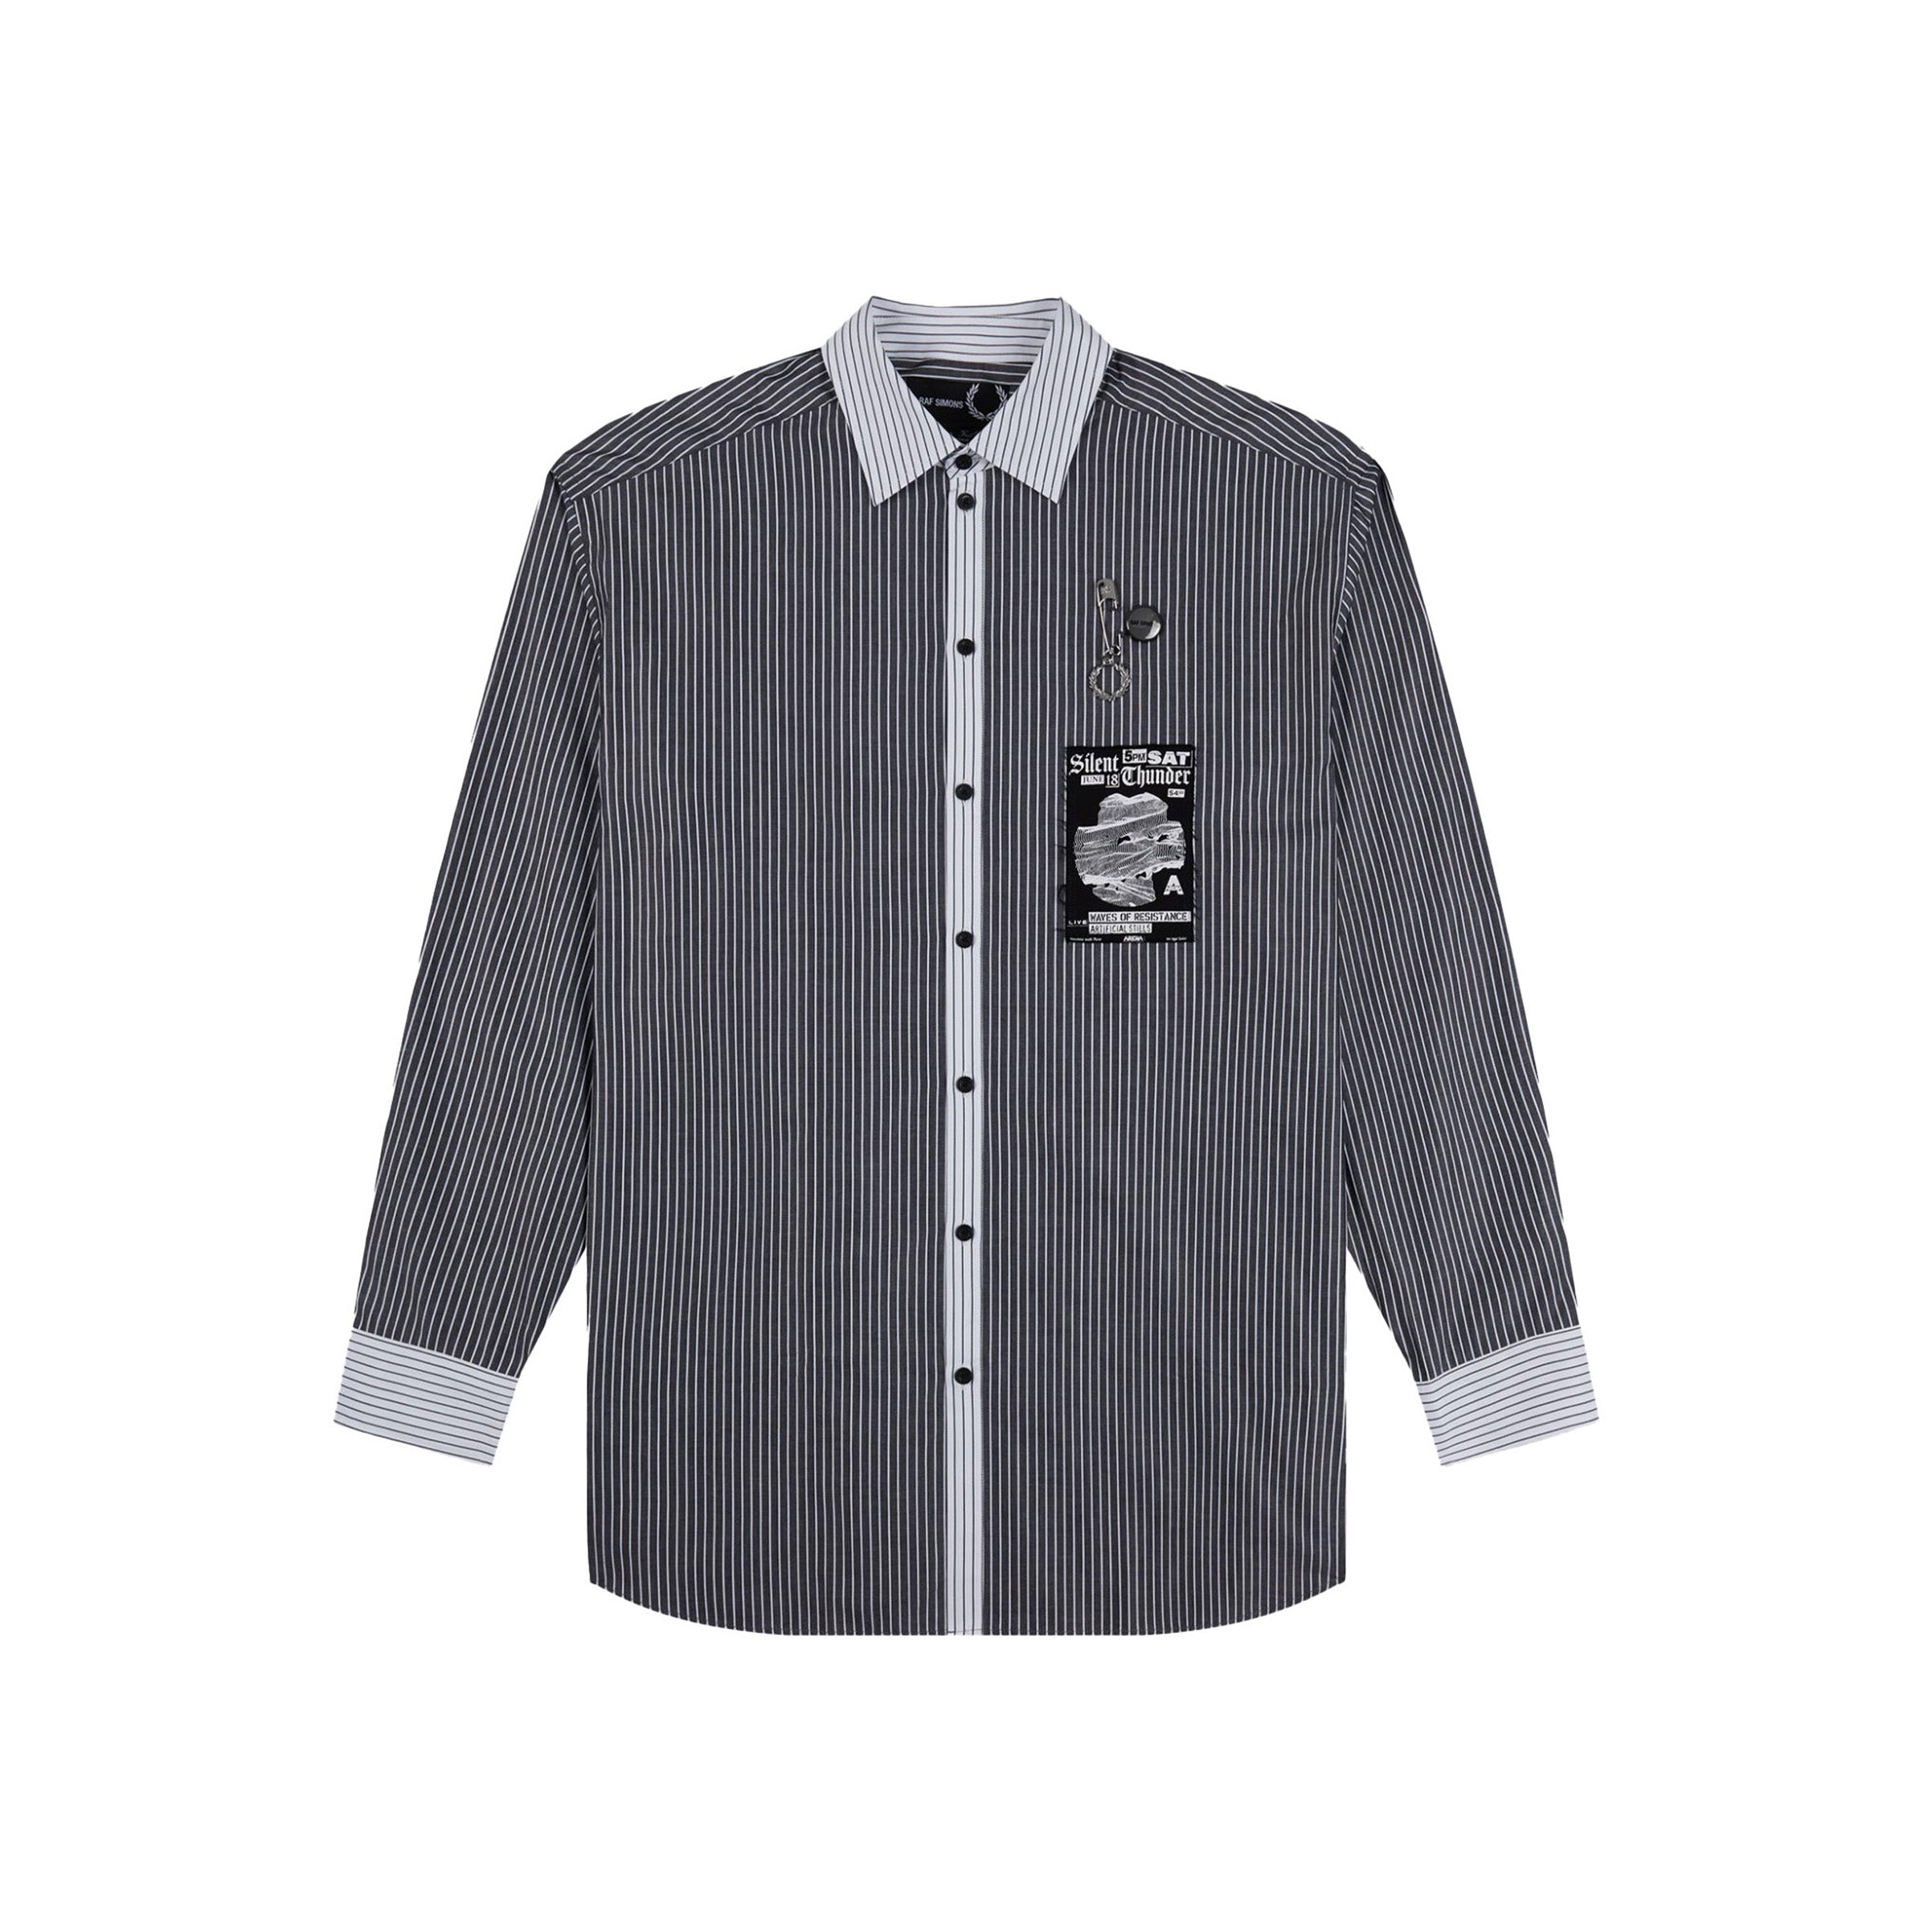 Fred Perry x Raf Simons Stripe Patch Oversized Shirt Black & SNEAKERBOX